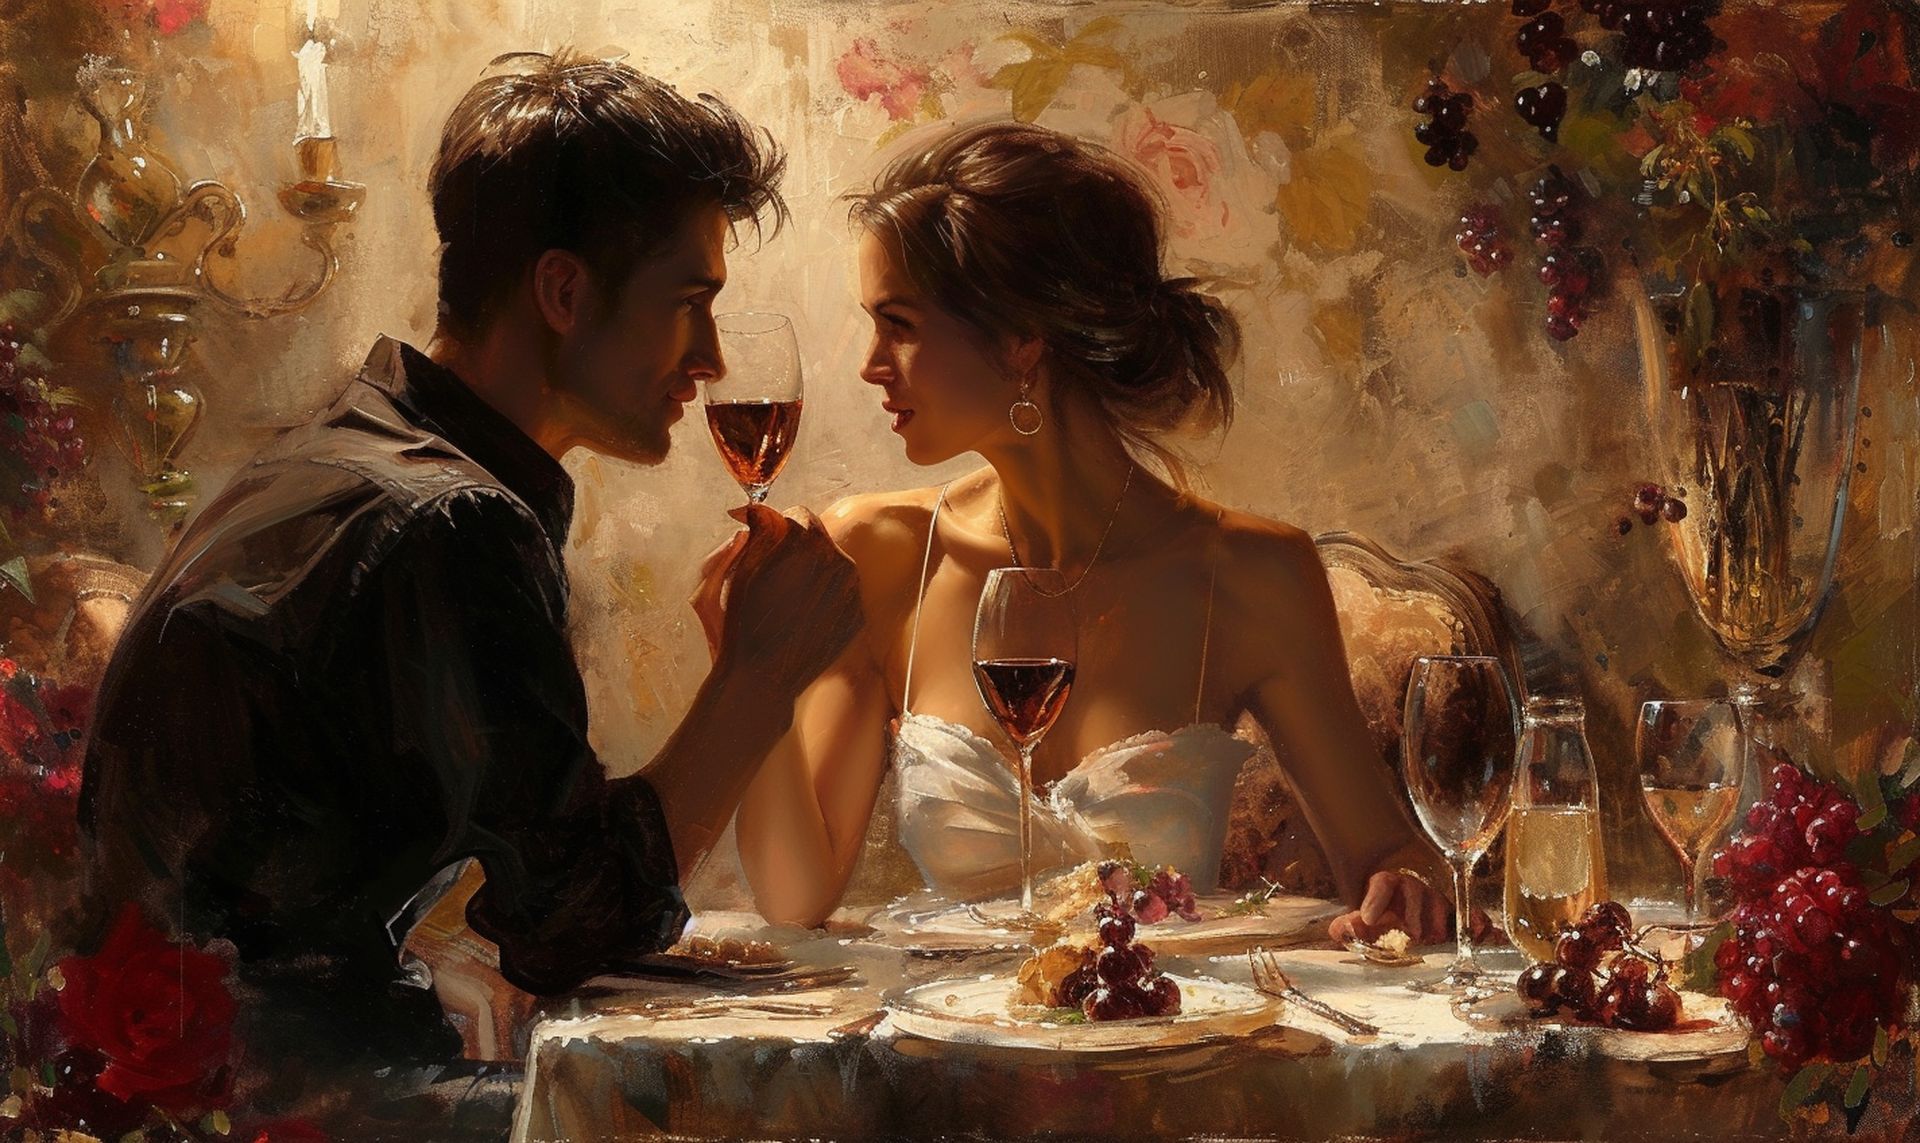 A romantic scene with a couple enjoying aphrodisiac foods and wine, surrounded by a warm, intimate ambiance, reflecting the theme of sensual culinary delights | Image credit: Umut Taydaş